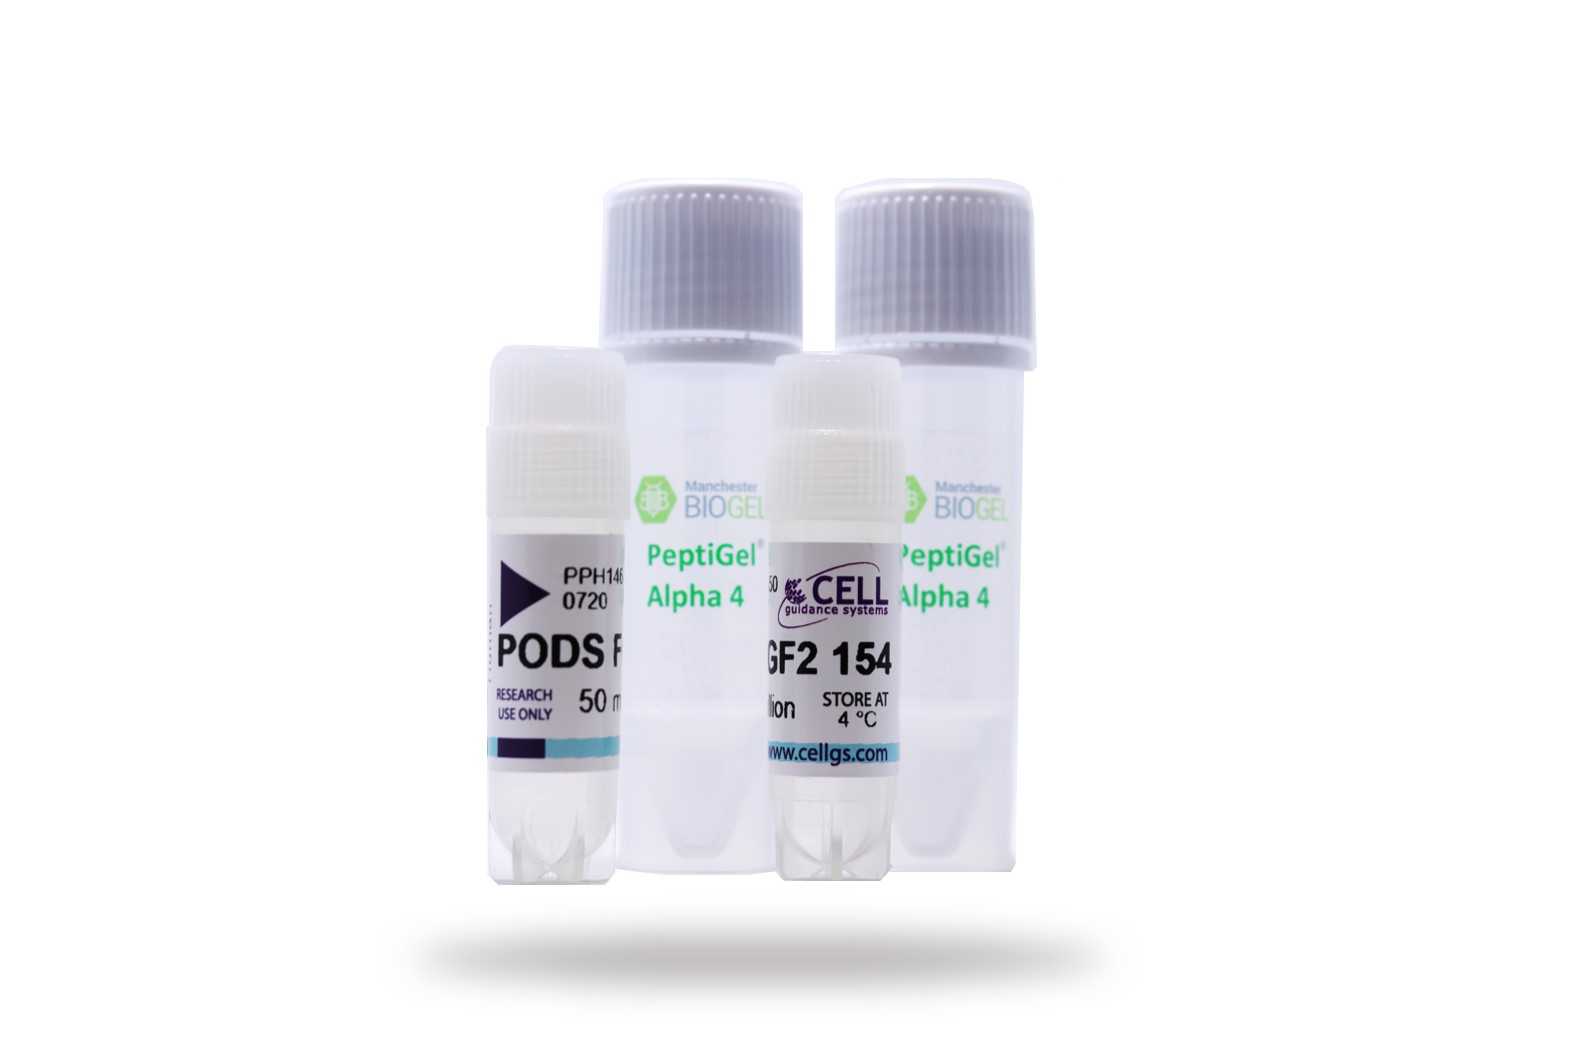 PODS-PeptiGels for improved 3D cell culture launched